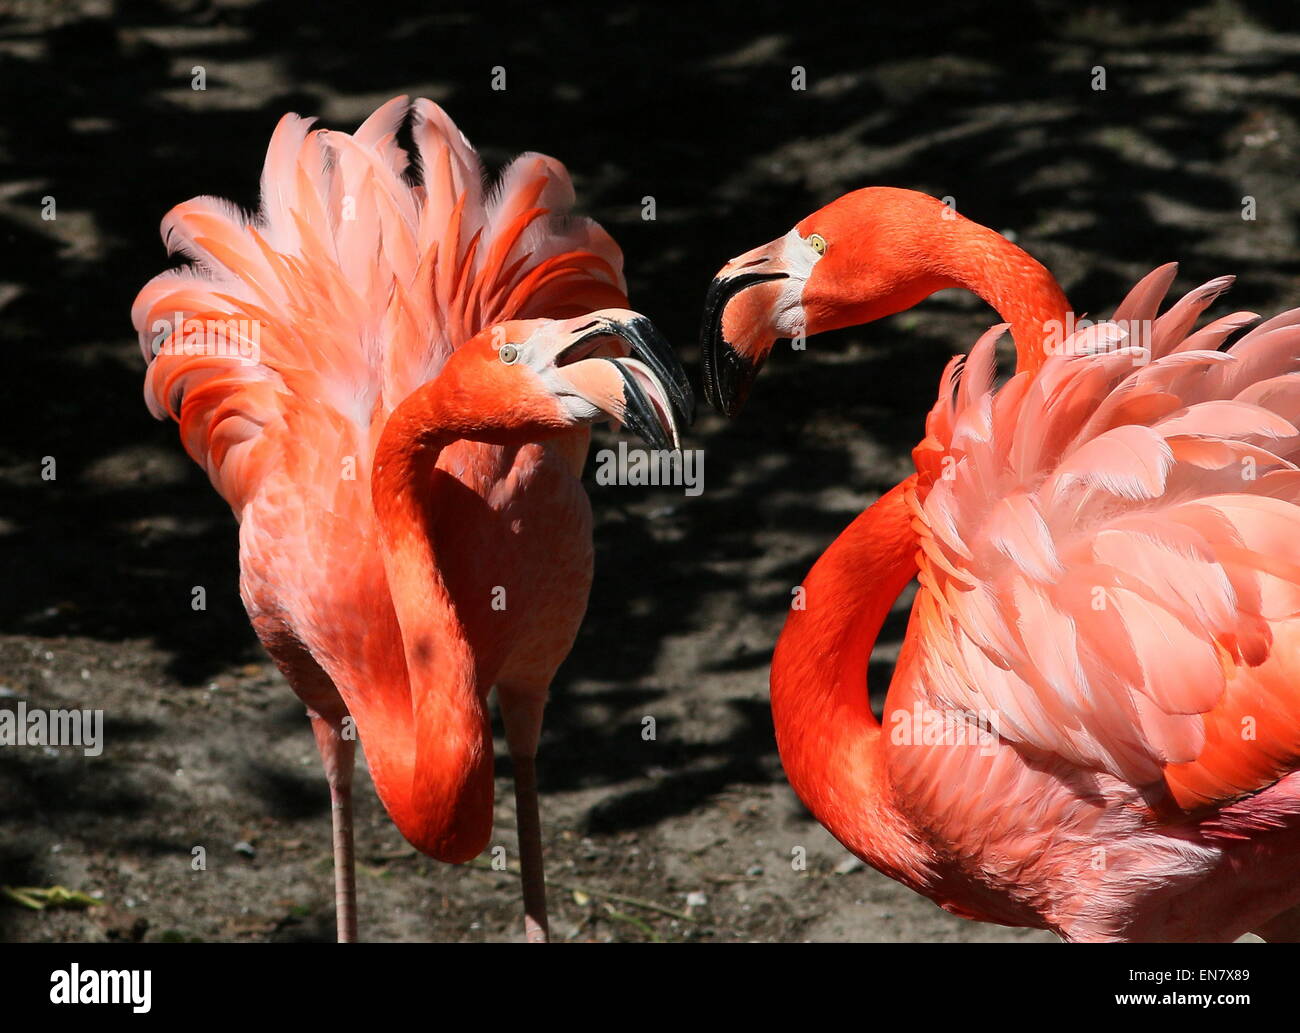 Feisty American or Caribbean flamingos  (Phoenicopterus ruber) fighting, closeup of the heads Stock Photo